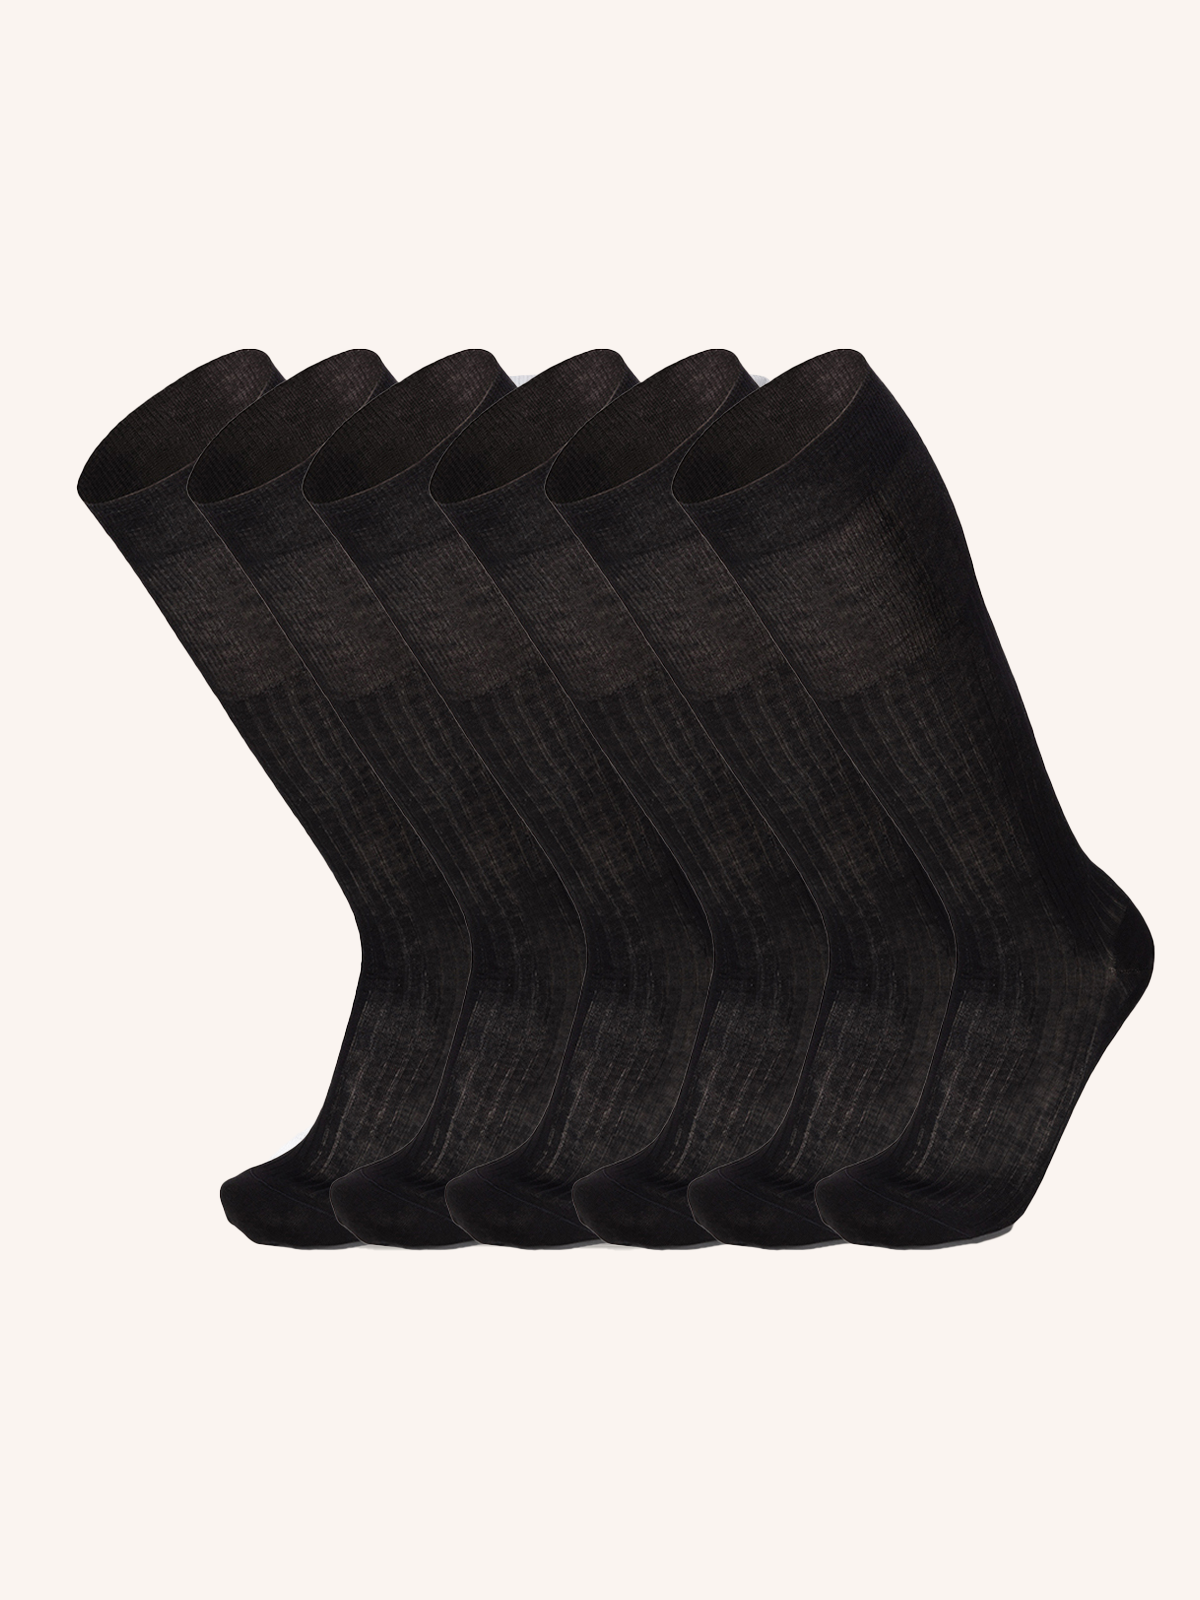 Long Double Strength Sock in Lisle for Men | Plain Color | Pack of 6 Pairs | Prince Costa Lungo